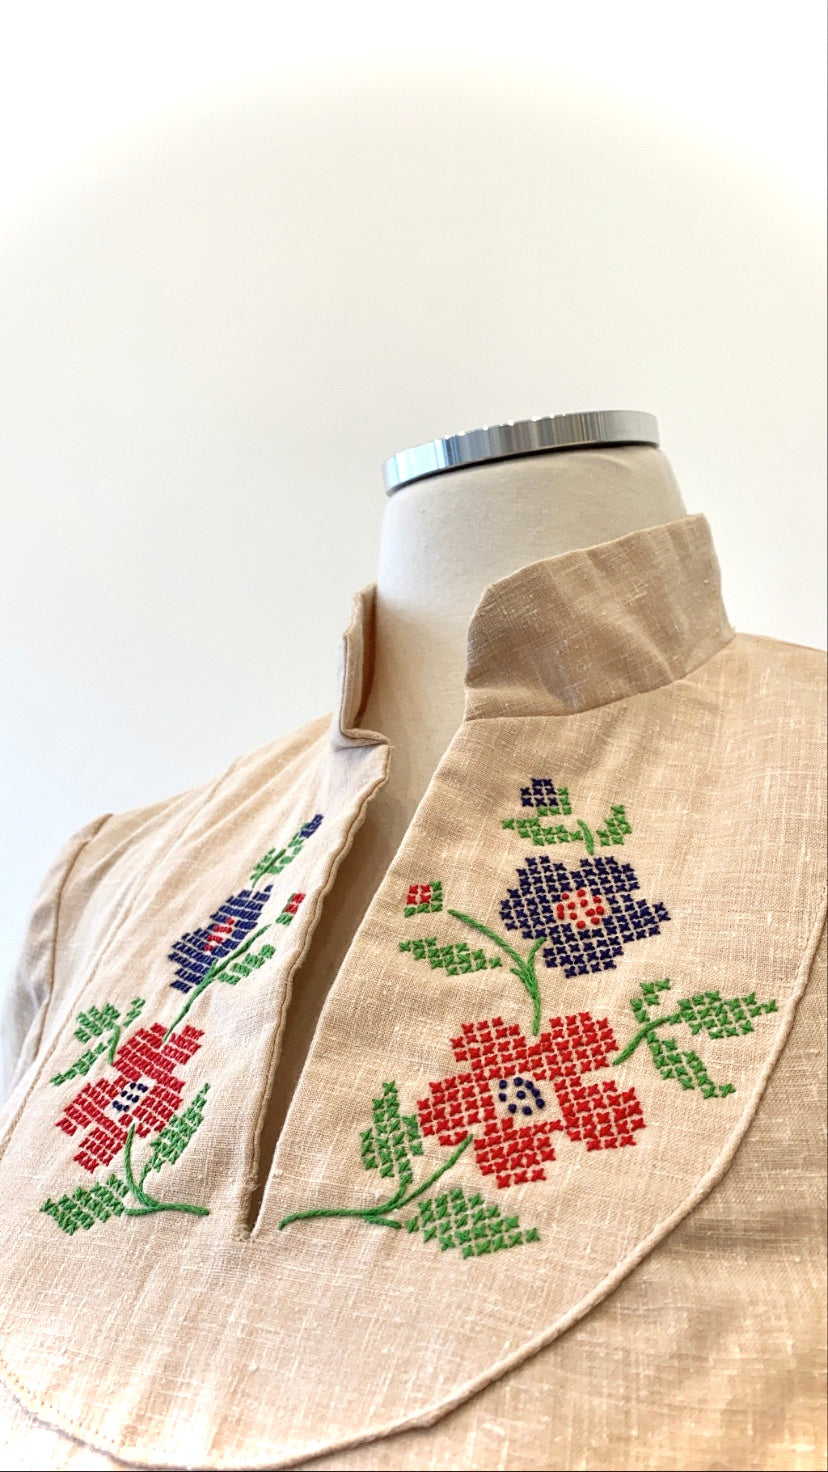 Vintage - Cotton Shirt with Cross-stitch Embroidery